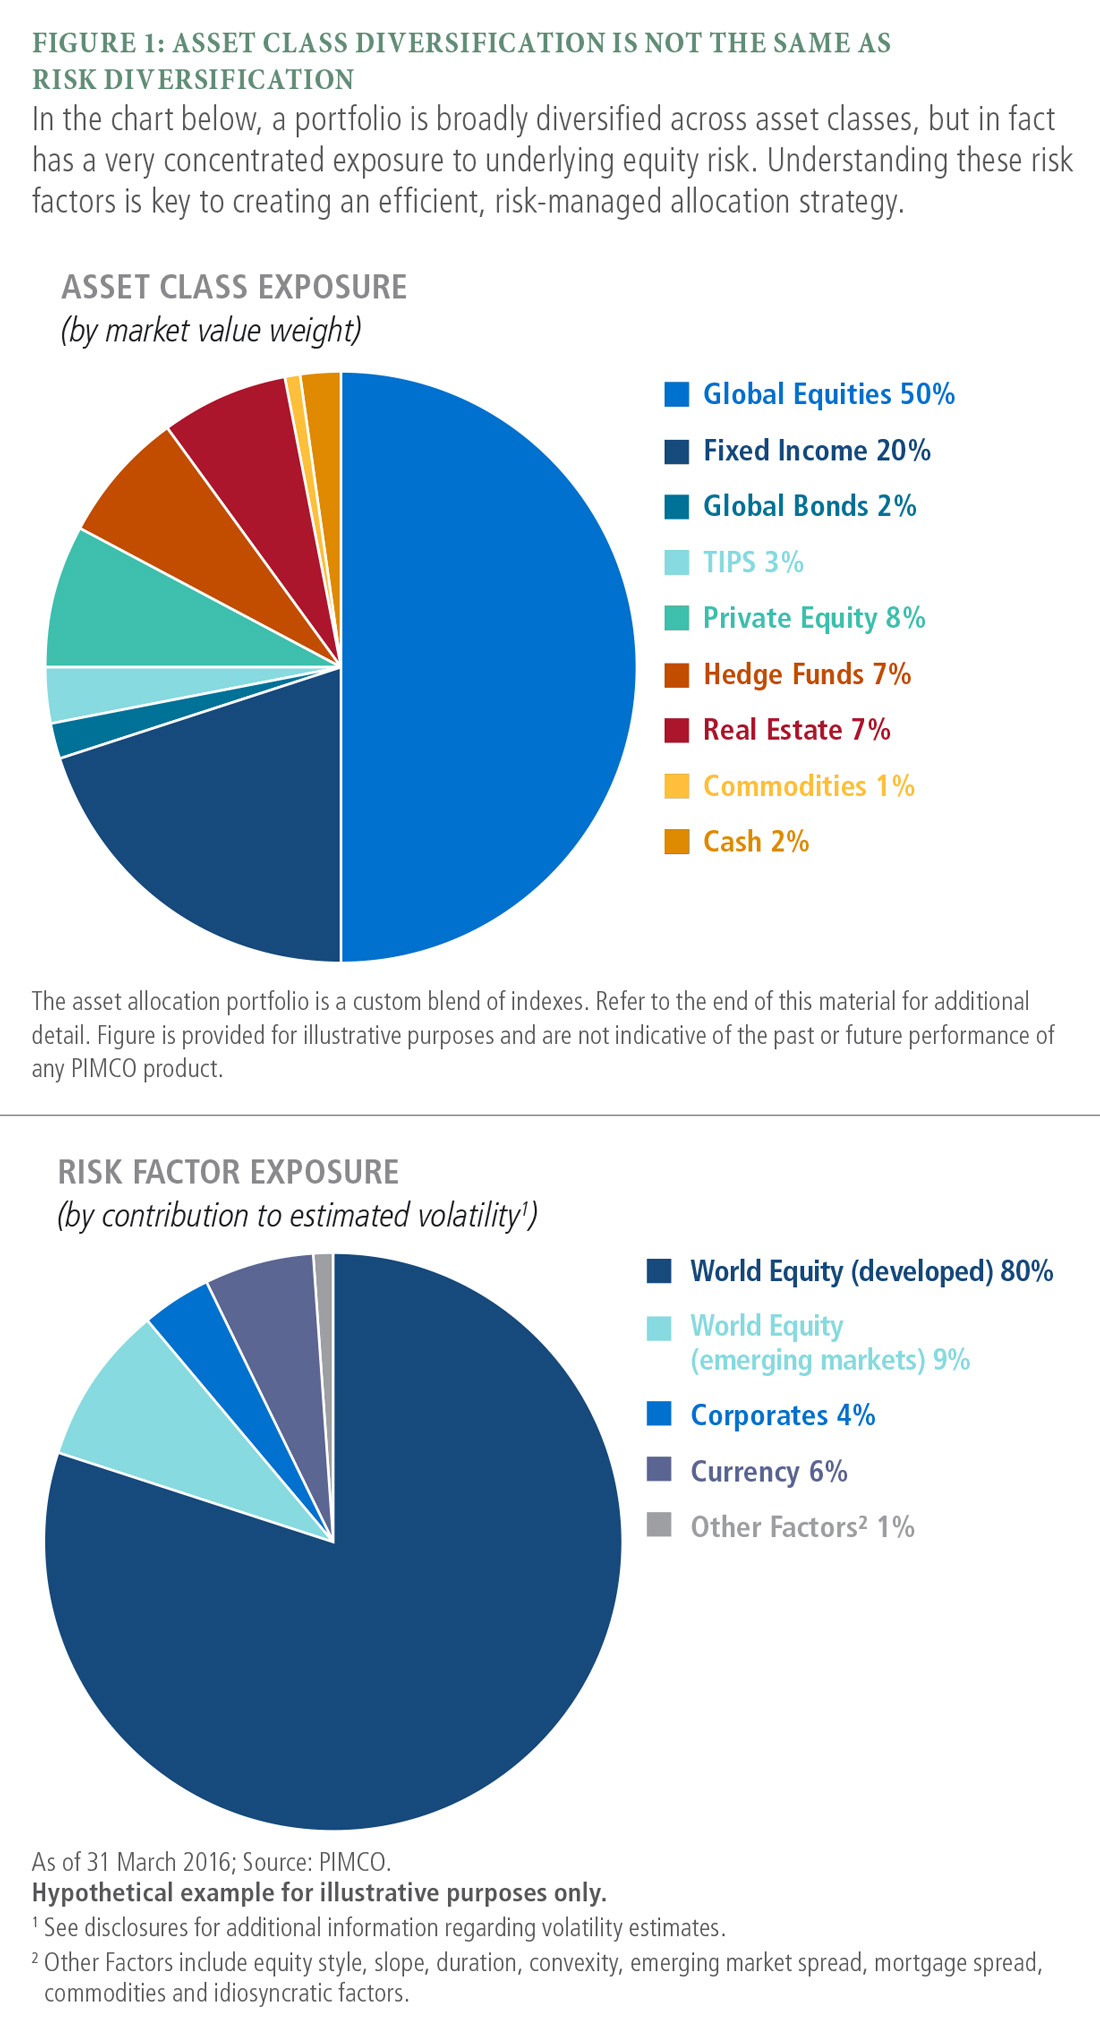 There are two pie charts: The top pie chart is a hypothetical asset allocation breakdown of a broadly diversified portfolio. The allocations by market value weight are (from largest to smallest): global equities (50%), fixed income (20%), global bonds (2%), TIPS (3%), private equity (8%), hedge funds (7%), real estate (7%), commodities (1%) and cash (2%). The bottom pie chart is a hypothetical risk allocation breakdown of the same broadly diversified portfolio. The allocations by contribution to estimated volatility (from largest to smallest): world equity developed (80%), world equity emerging markets (9%), corporates (4%), currency (6%) and other factors (1%).